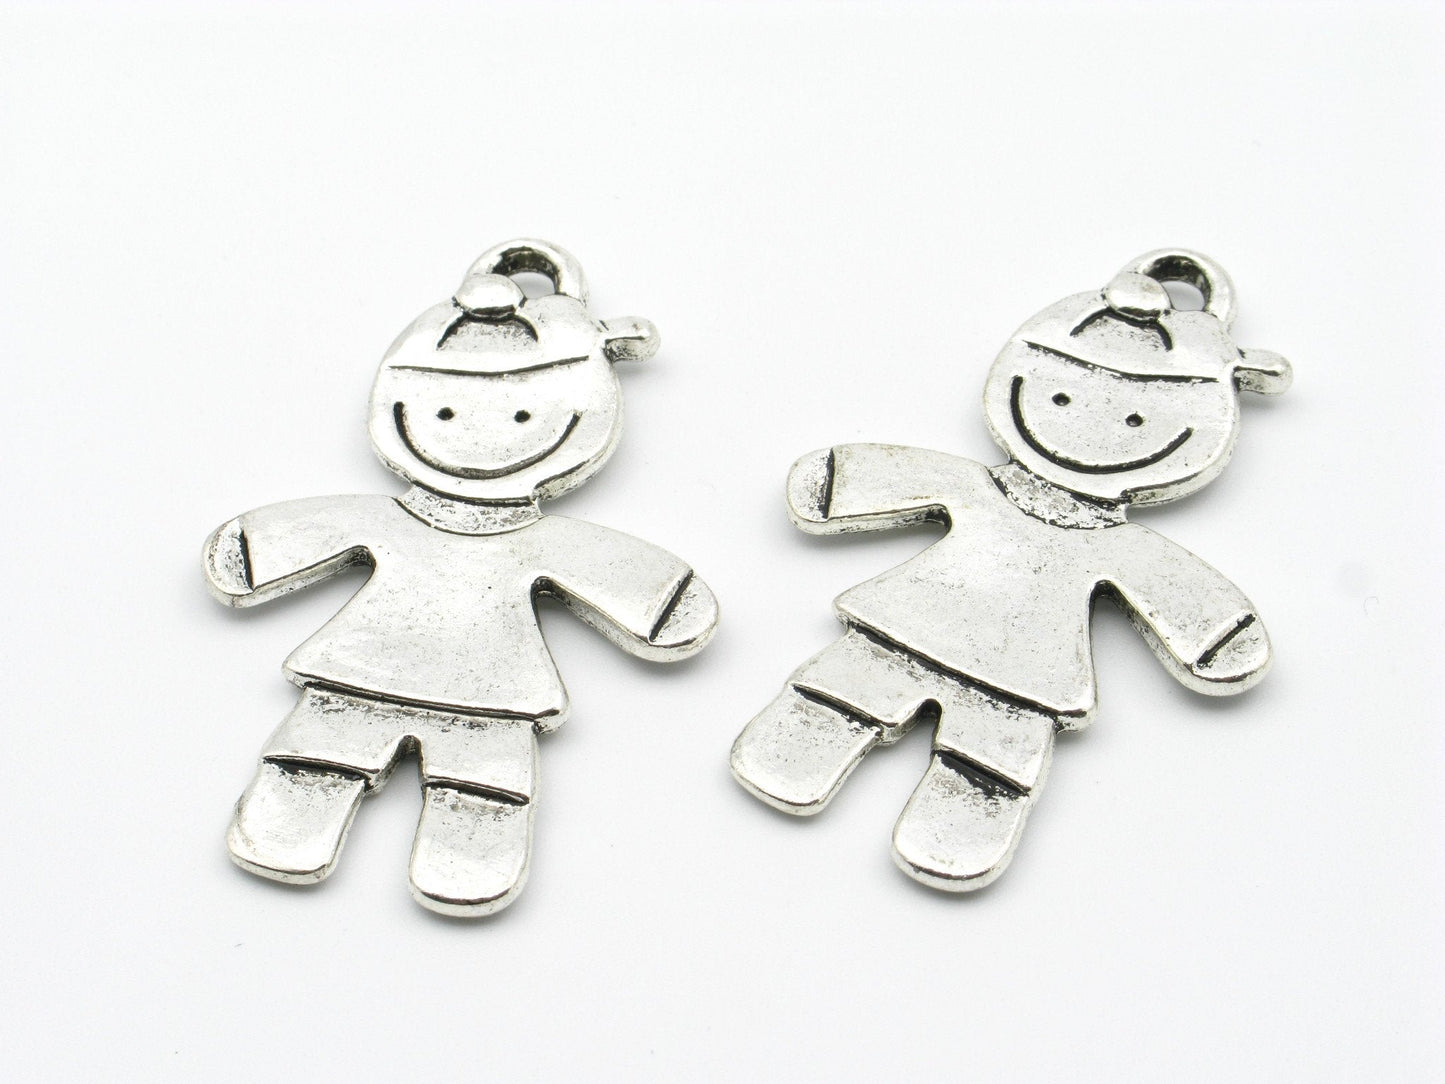 10 Pcs Antique Silver Boy pendant  jewelry supplies jewelry finding D-3-46